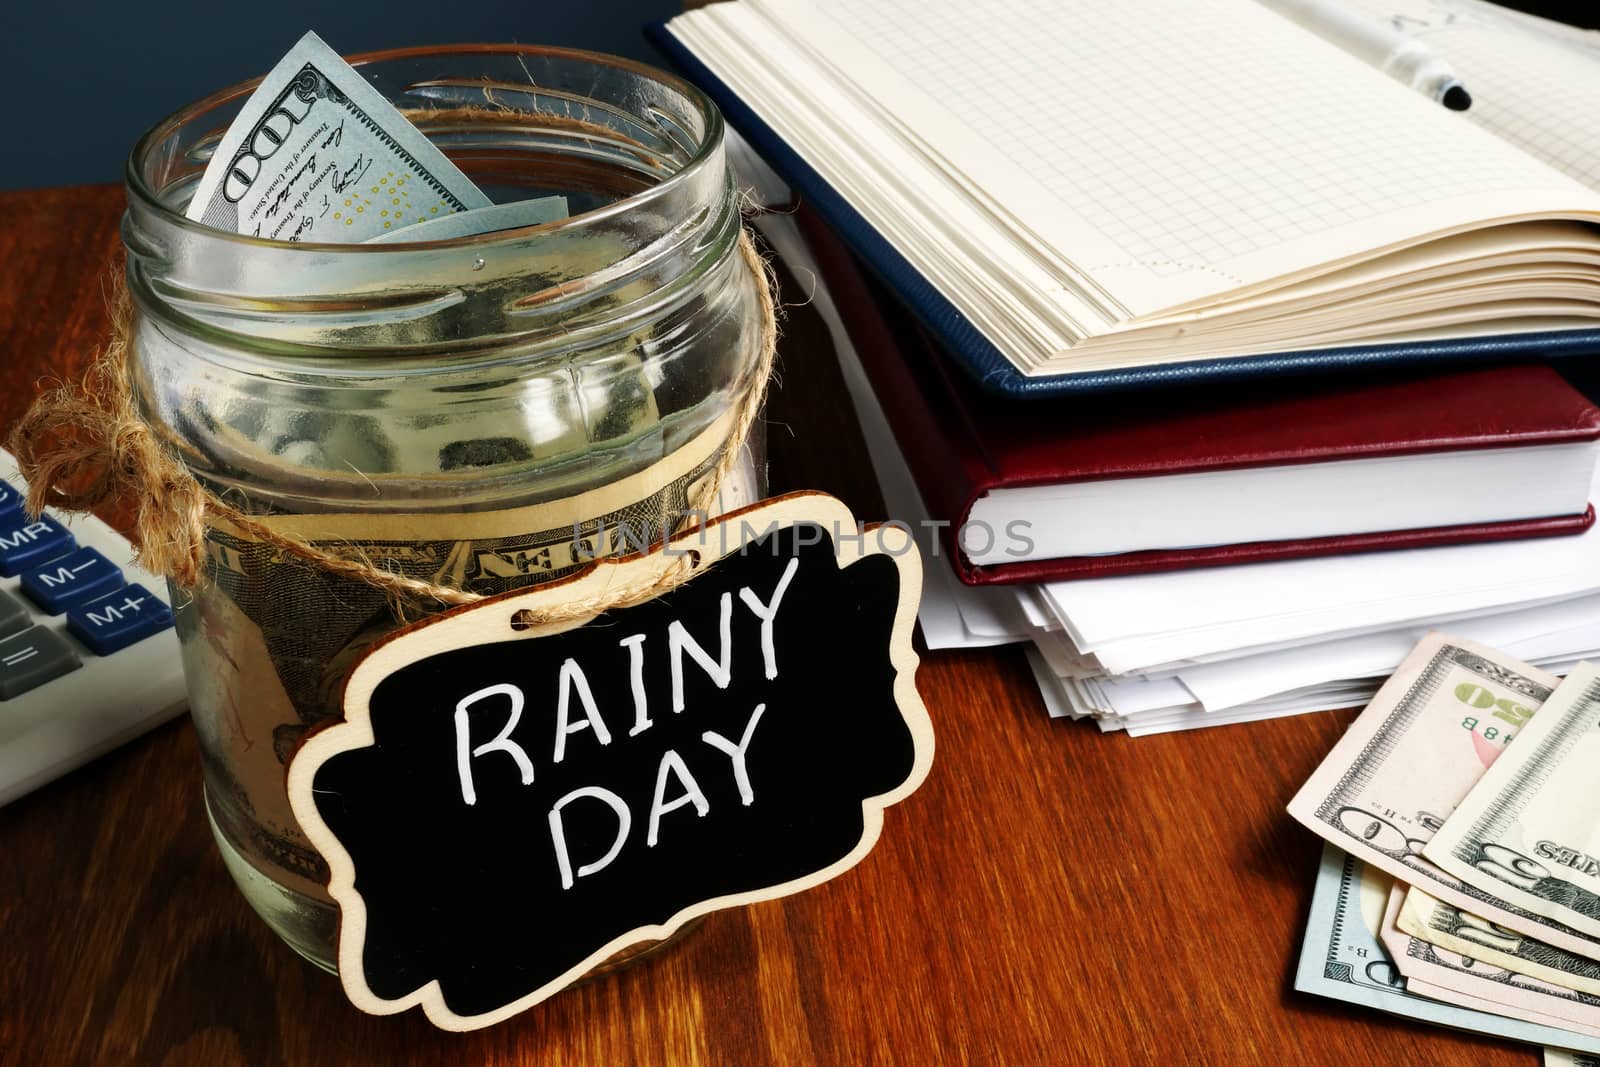 Rainy Day Fund label on the jar with money.